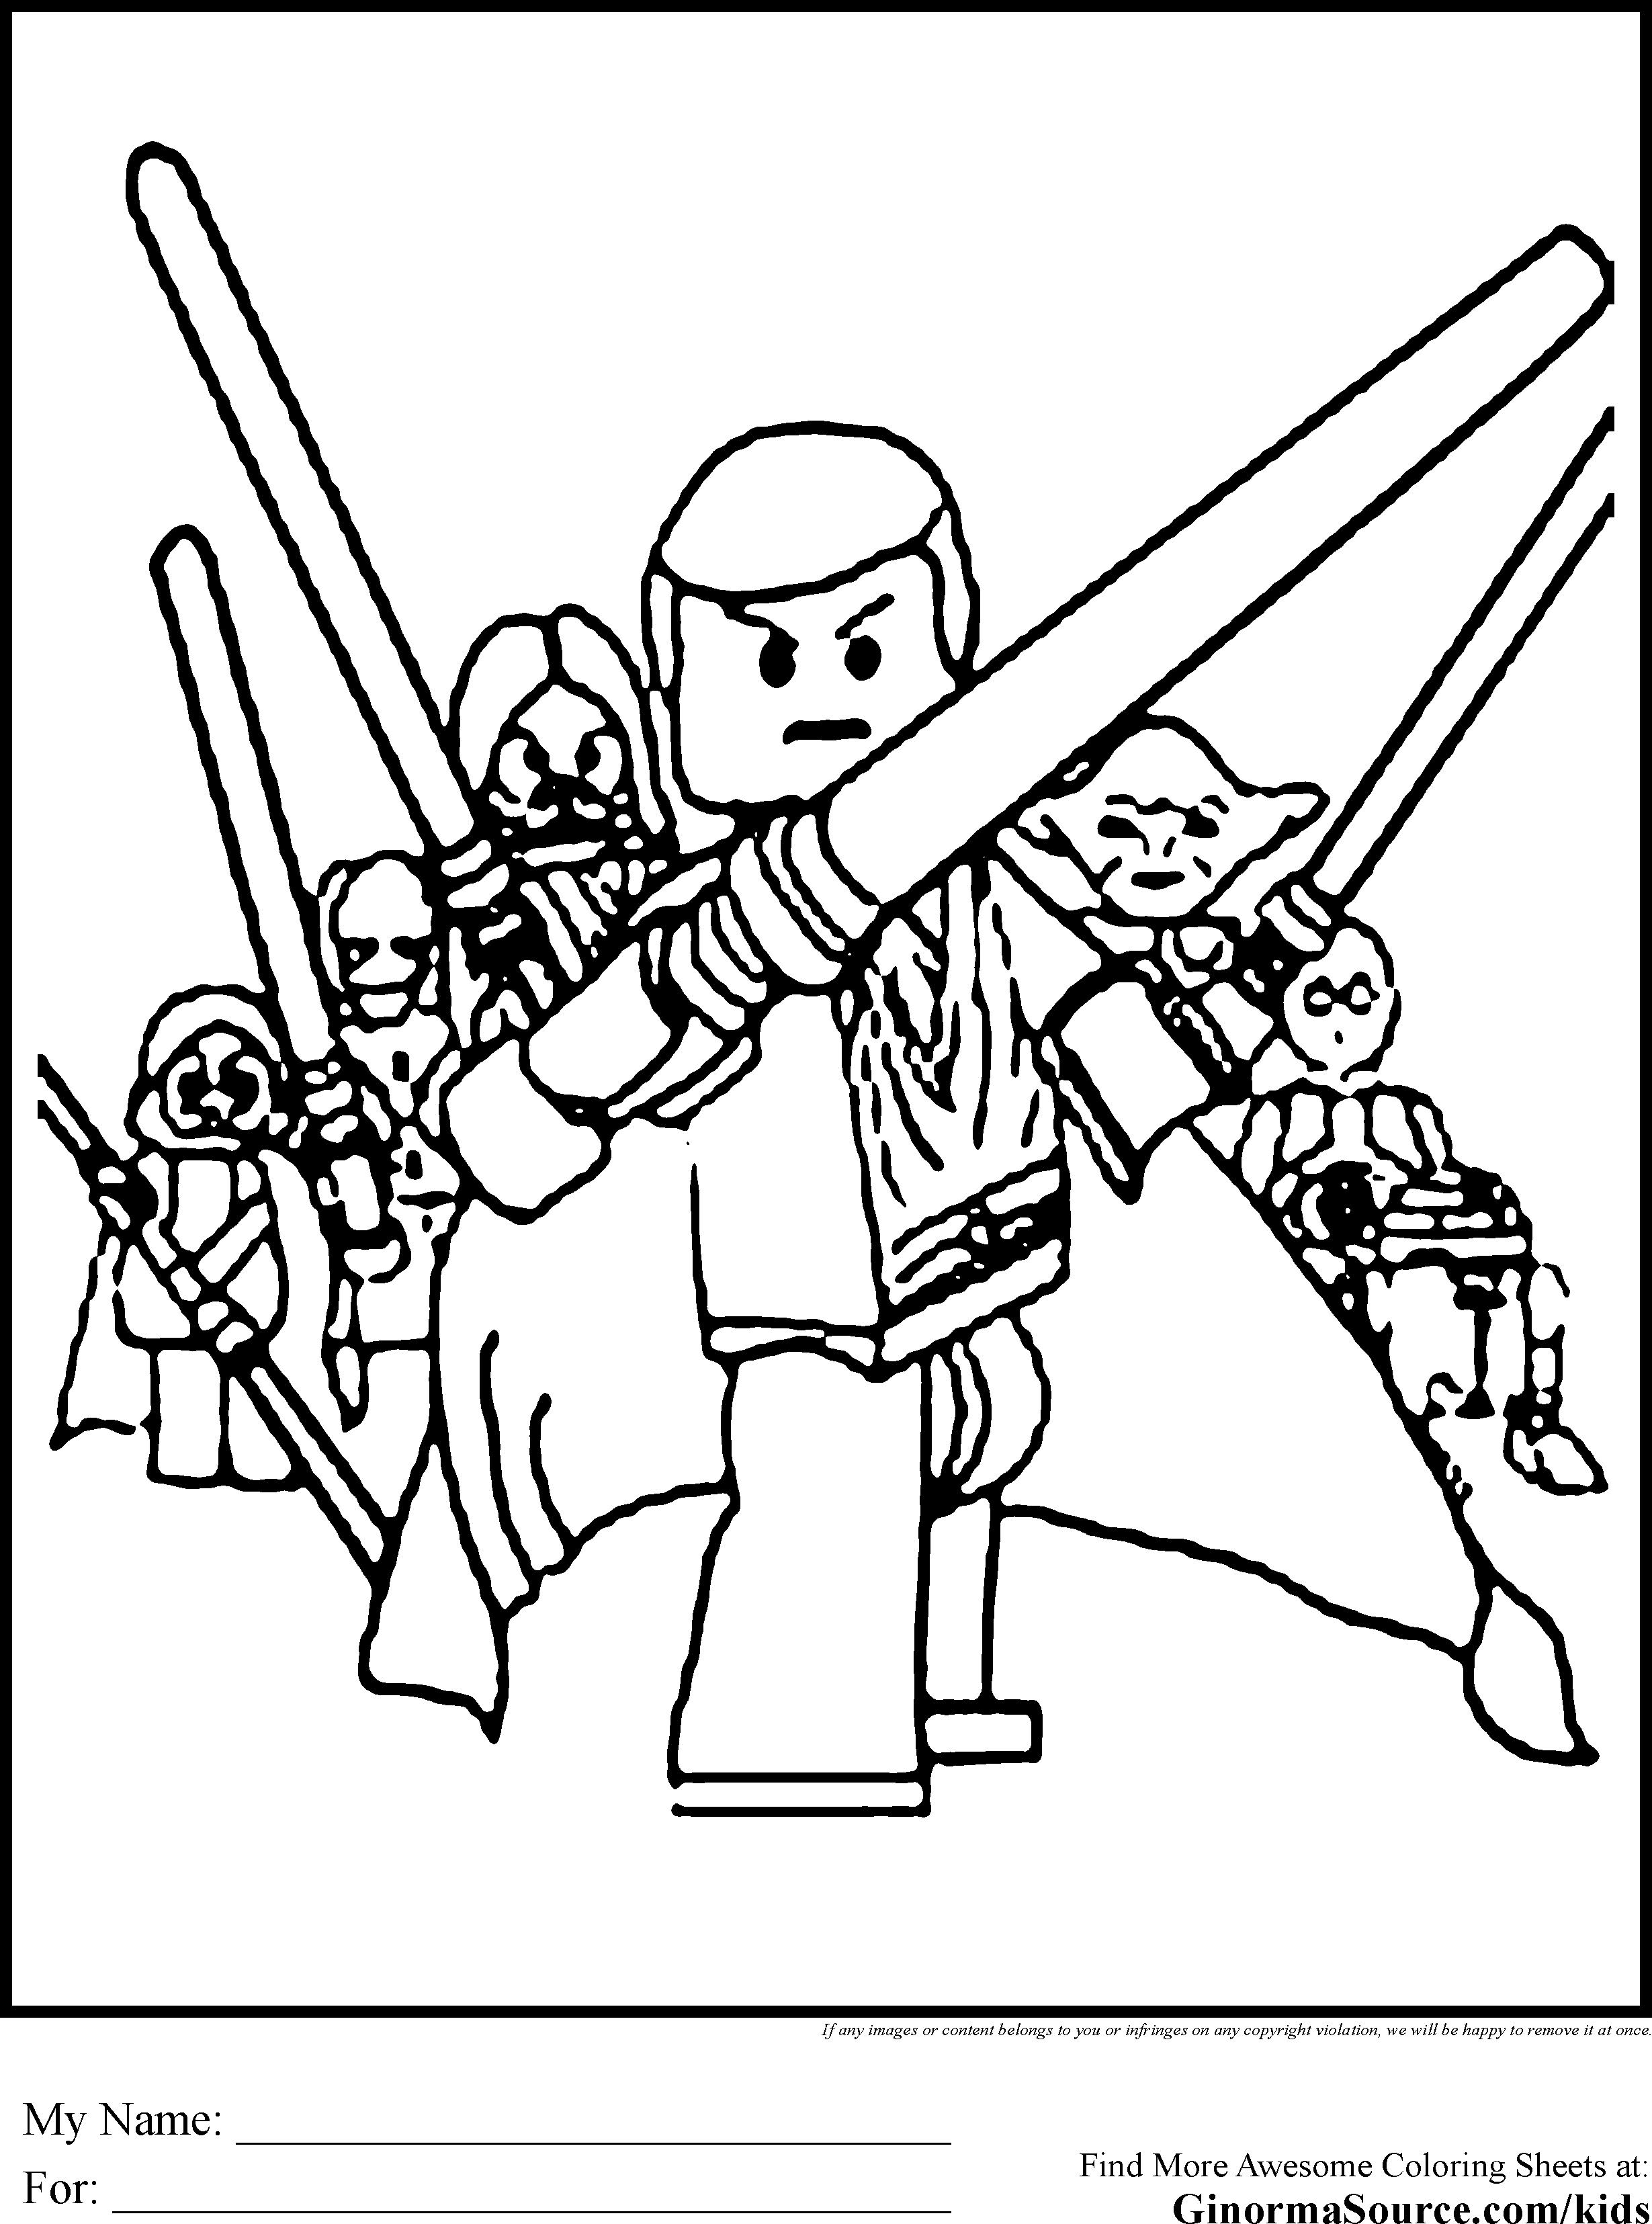 Animated Star Wars Coloring Pages - Ð¡oloring Pages For All Ages